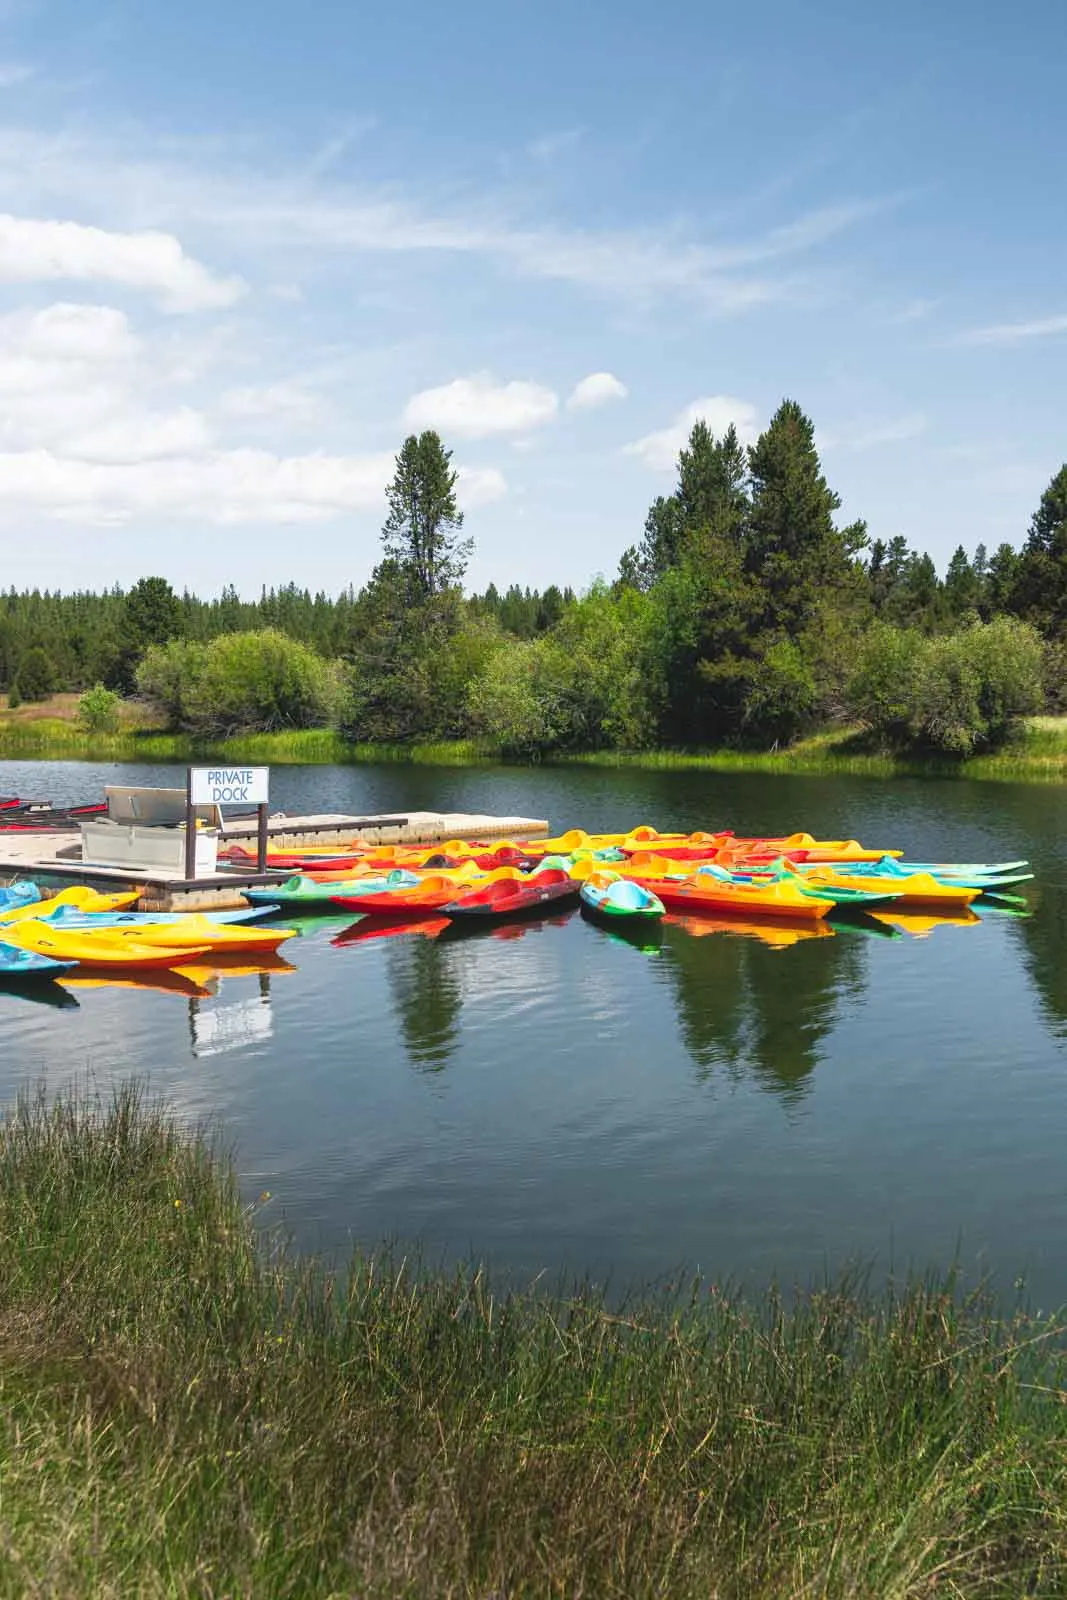 Kayaking is a fun thing to do in Sunriver.